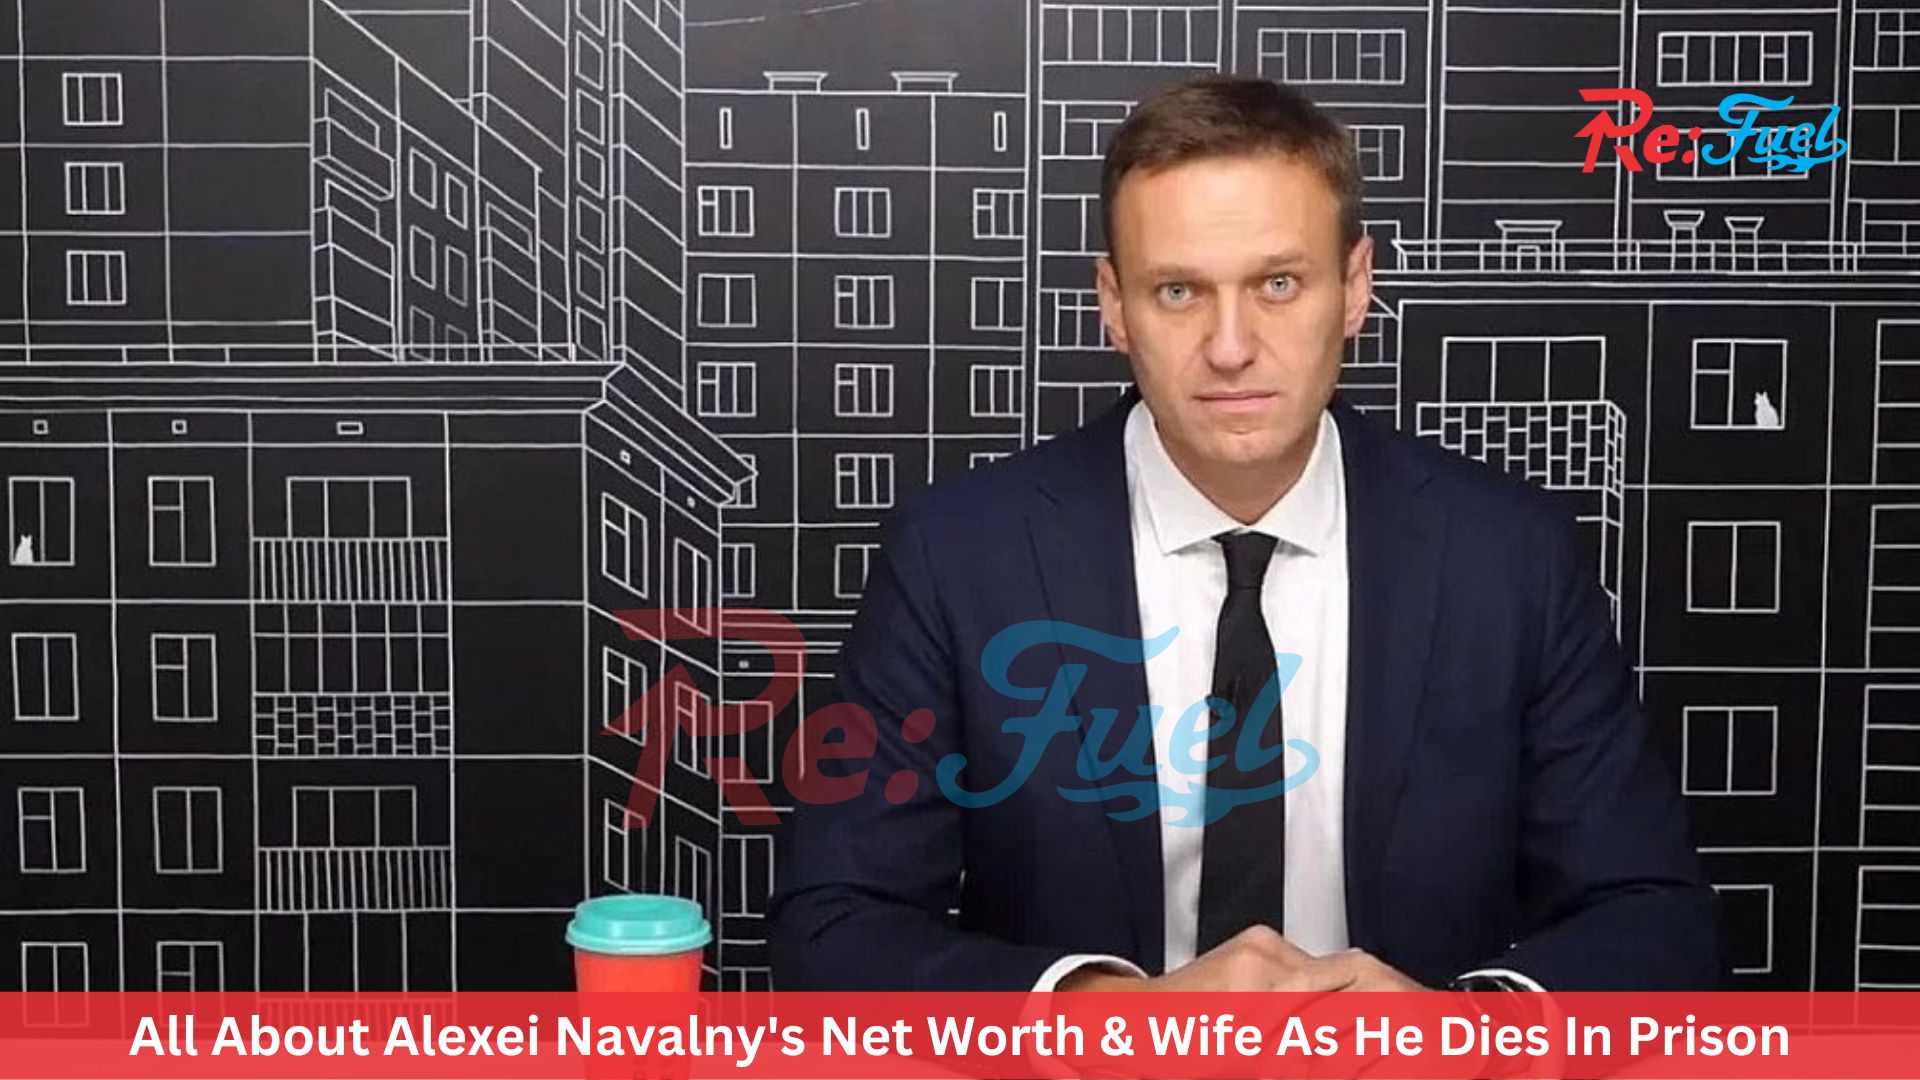 All About Alexei Navalny's Net Worth & Wife As He Dies In Prison